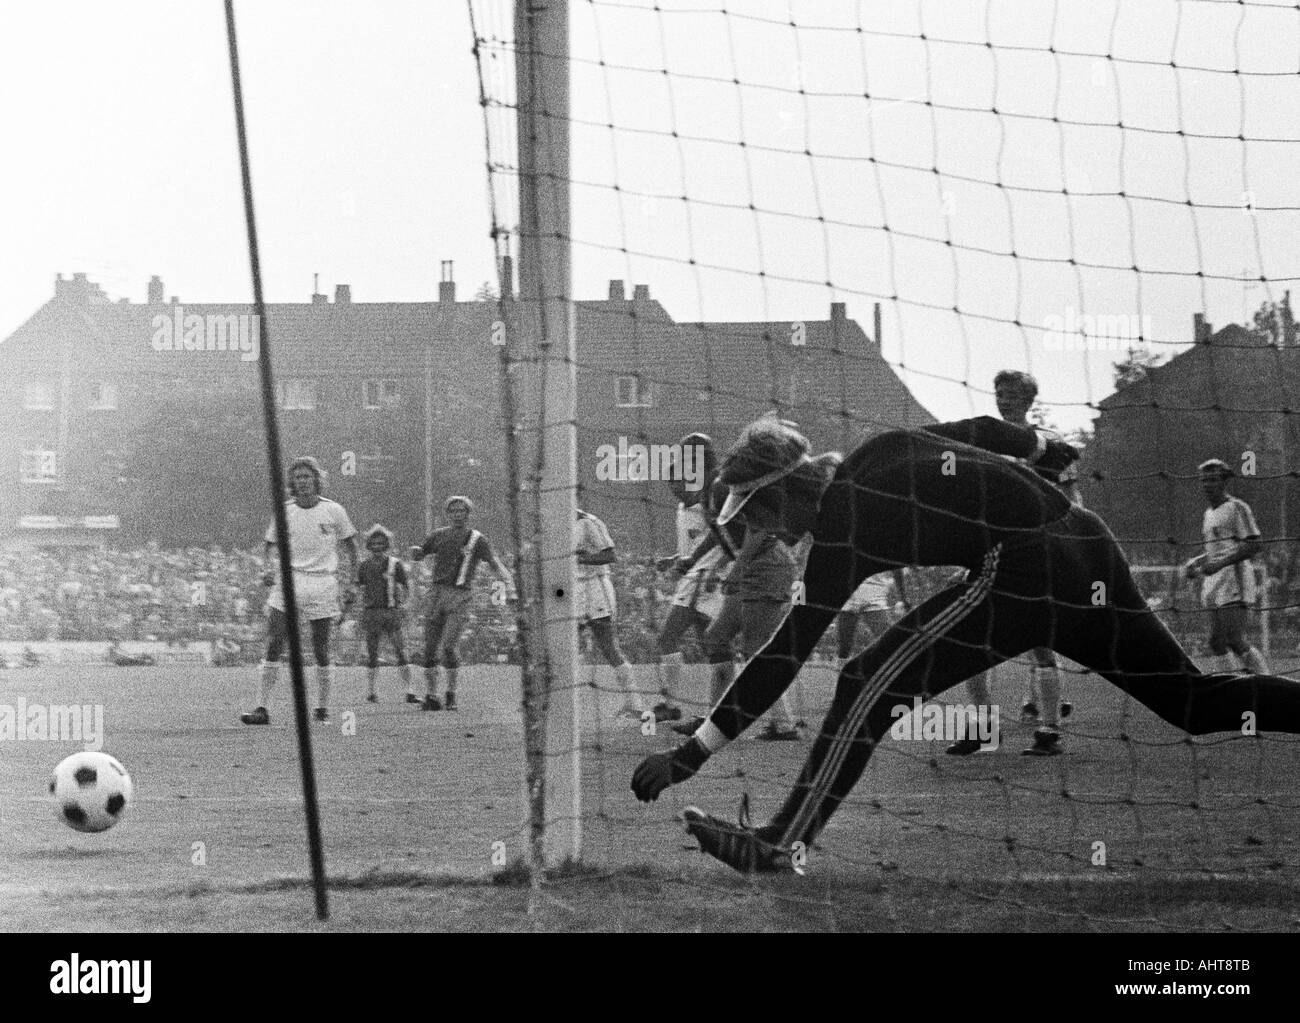 football, Bundesliga, 1971/1972, VfL Bochum versus Arminia Bielefeld 2:1, Stadium at the Castroper Strasse in Bochum, scene of the match, there is no need to act for keeper Hans Juergen Bradler (Bochum) Stock Photo